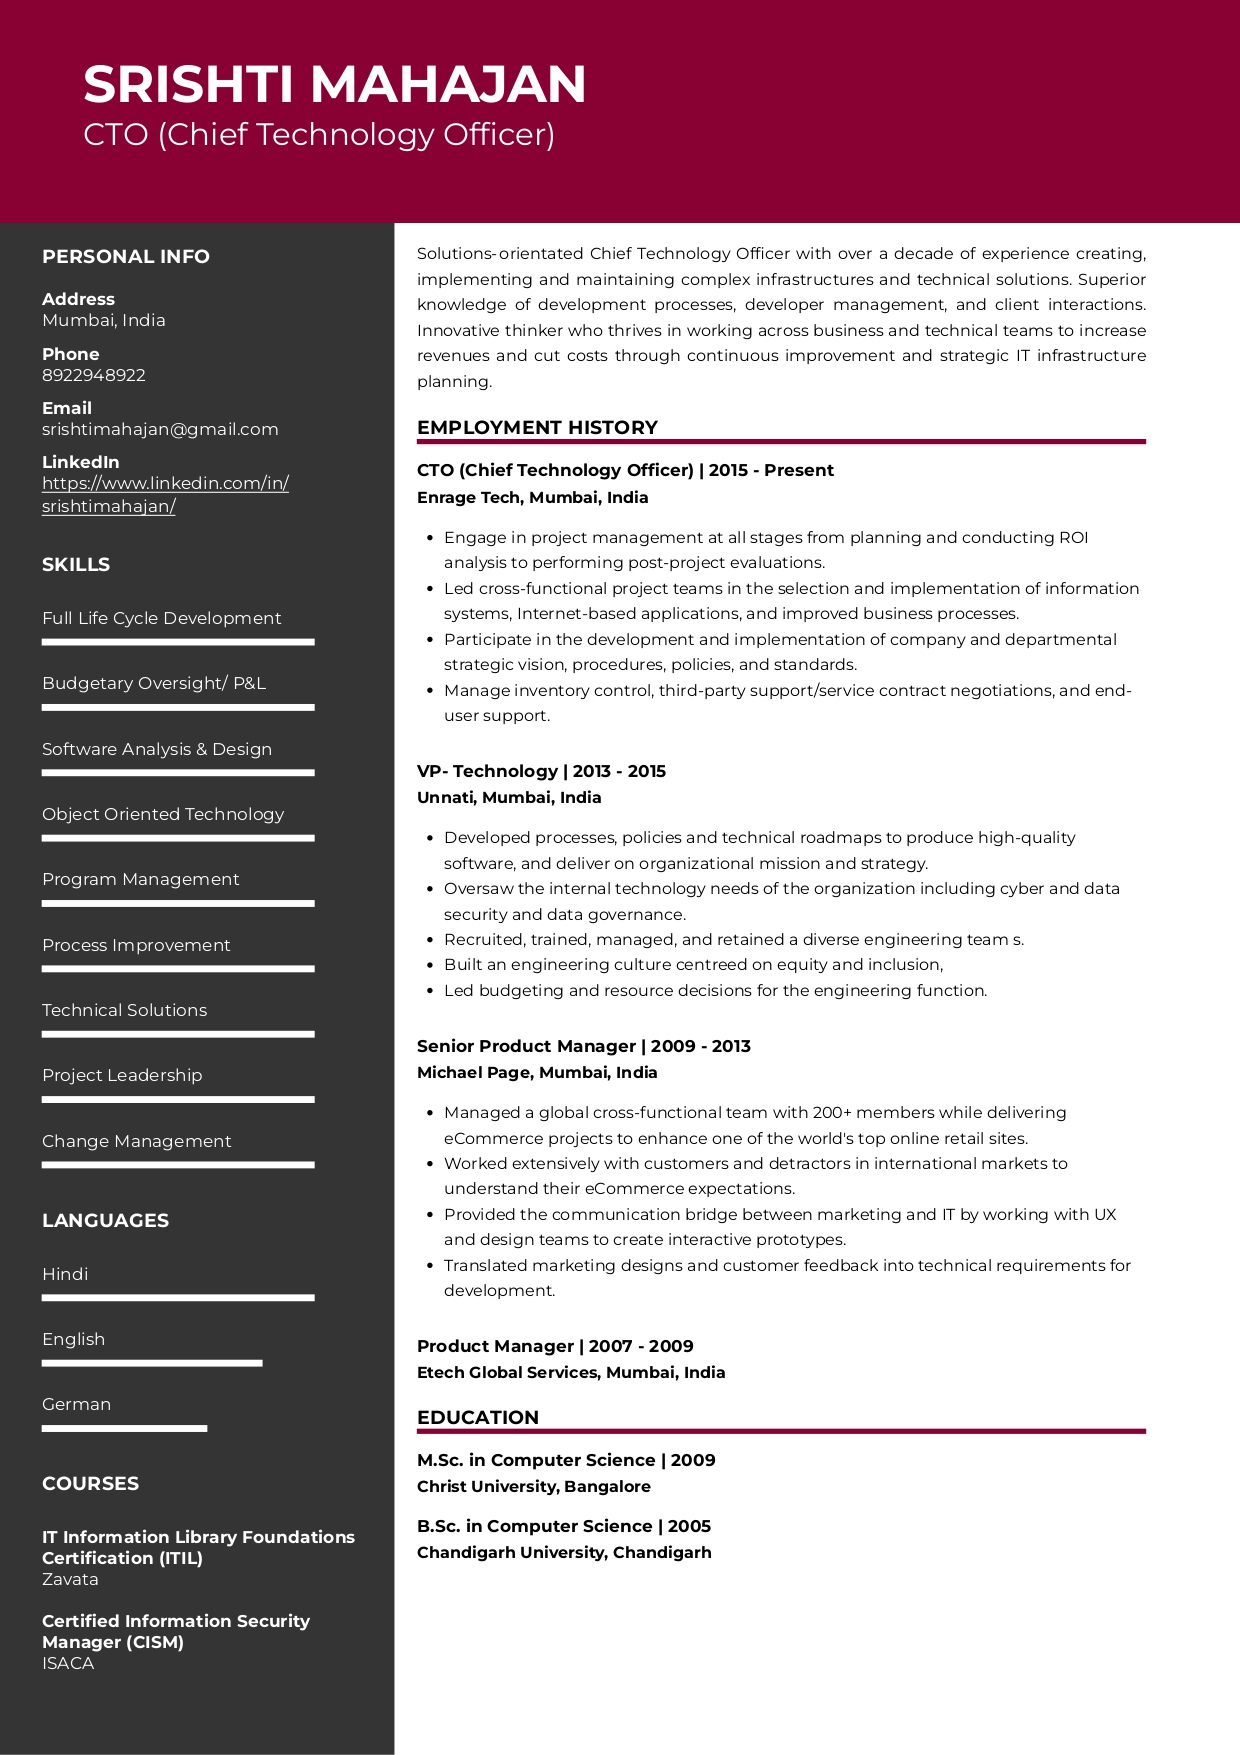 Sample Resume of Chief Technology Officer (CTO) | Free Resume Templates & Samples on Resumod.co